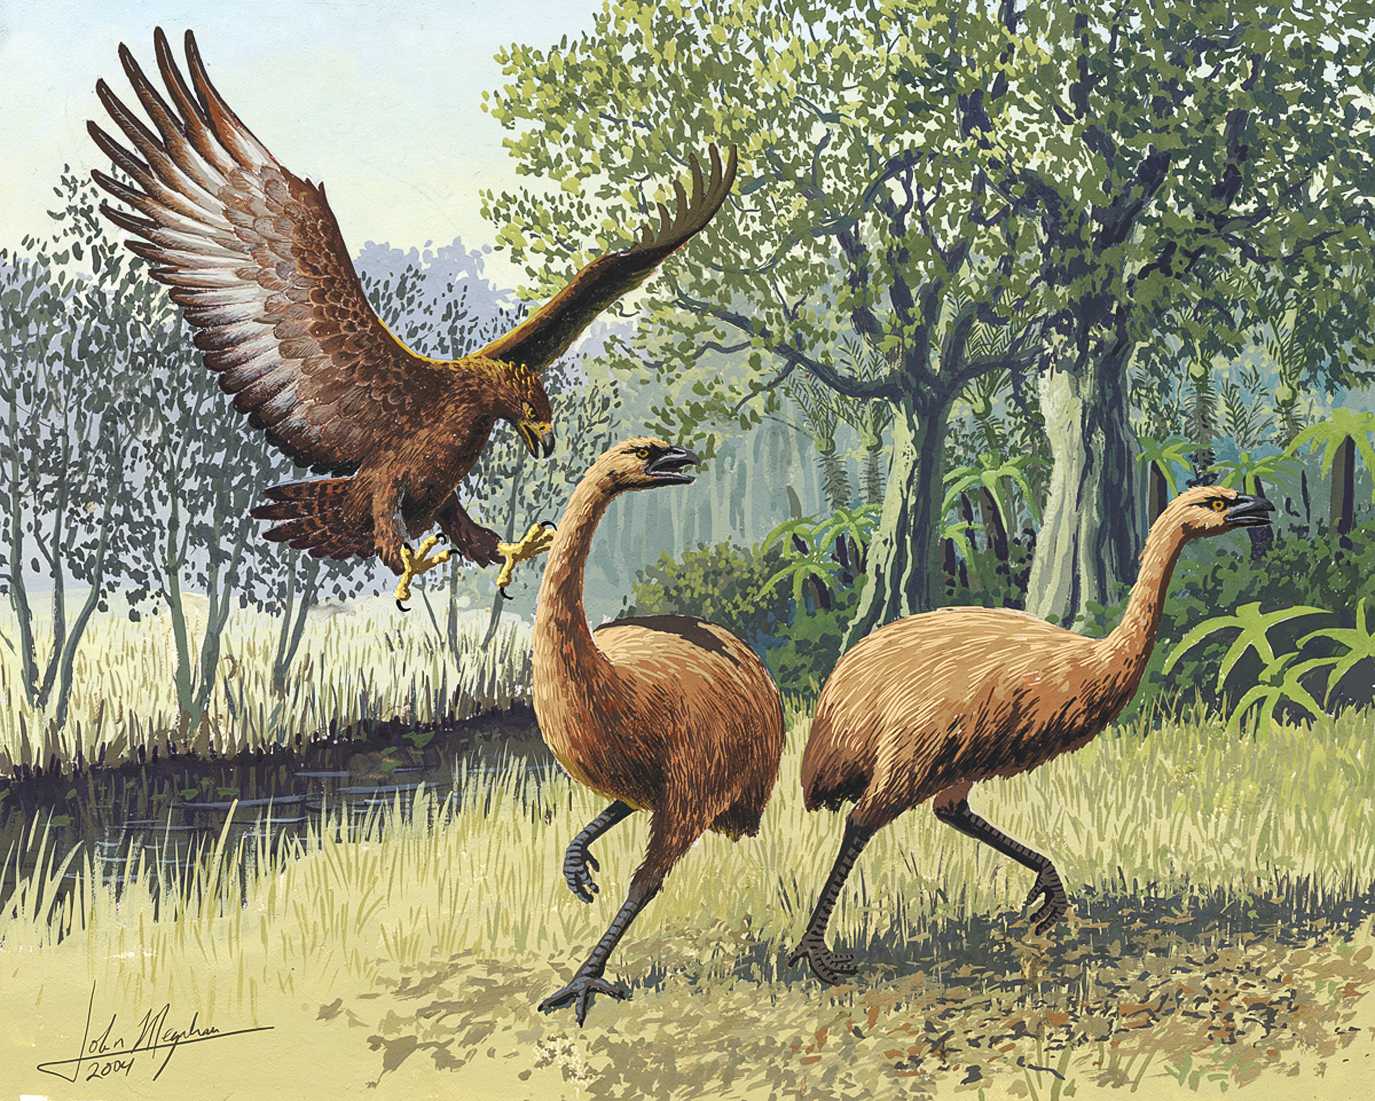 An artist's rendition of a Haast's eagle attacking moa